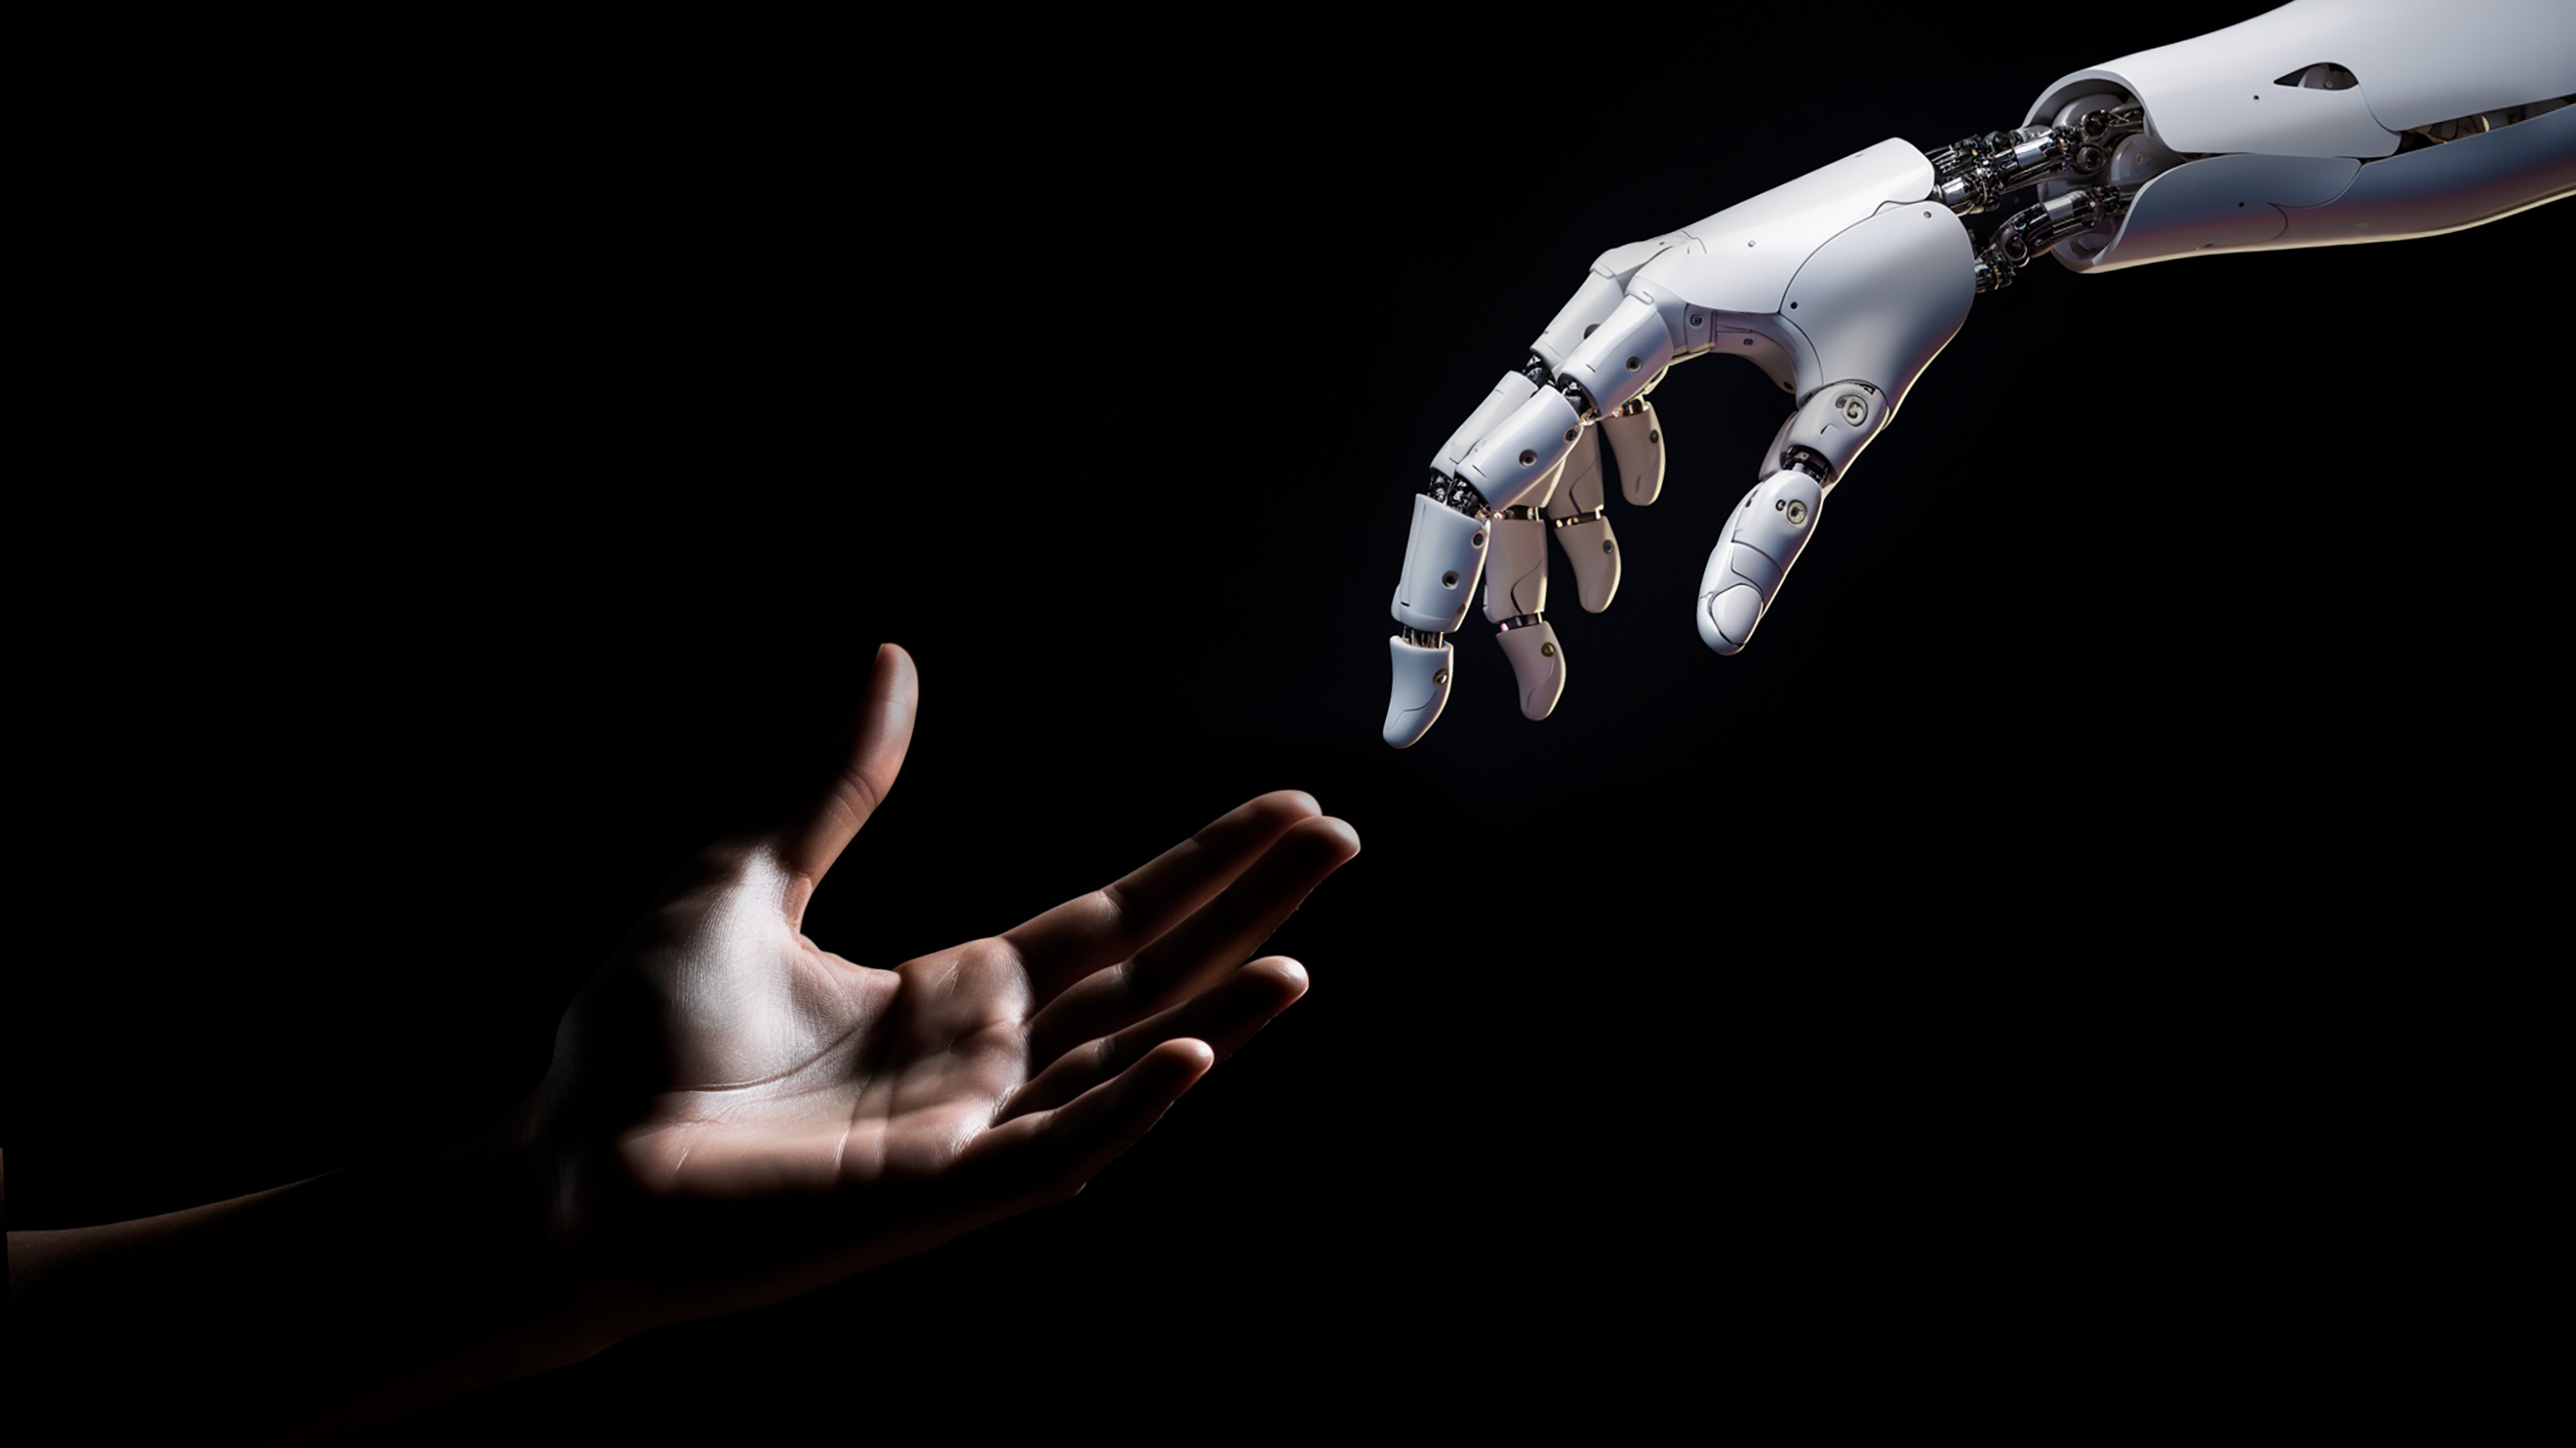 A robotic hand and a human hand reach towards each other against a dark background.